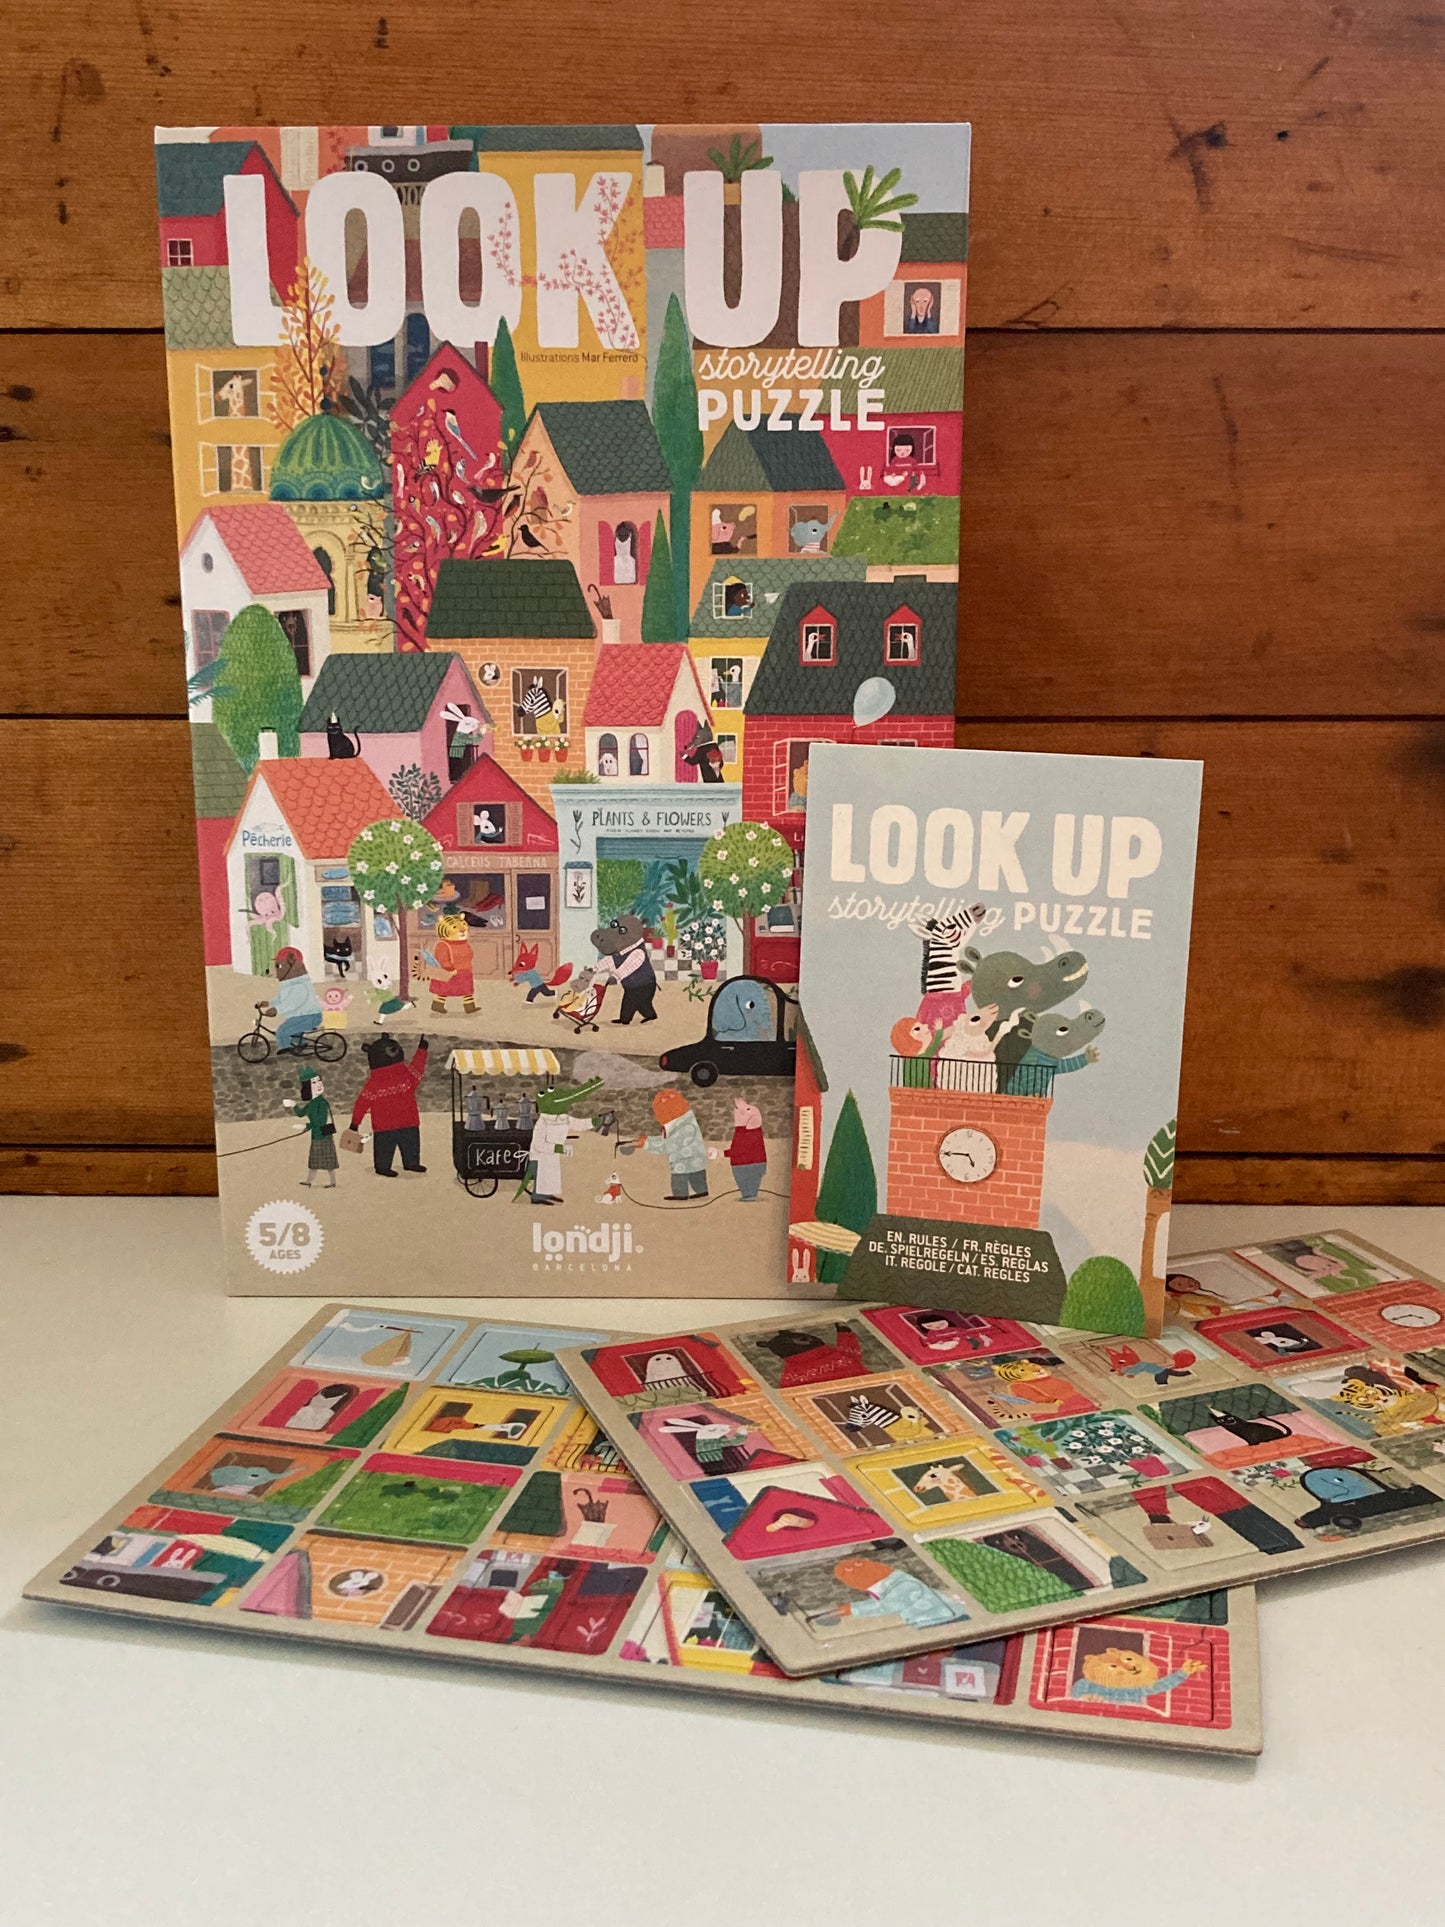 Puzzle - LOOK UP!, "a storytelling puzzle"